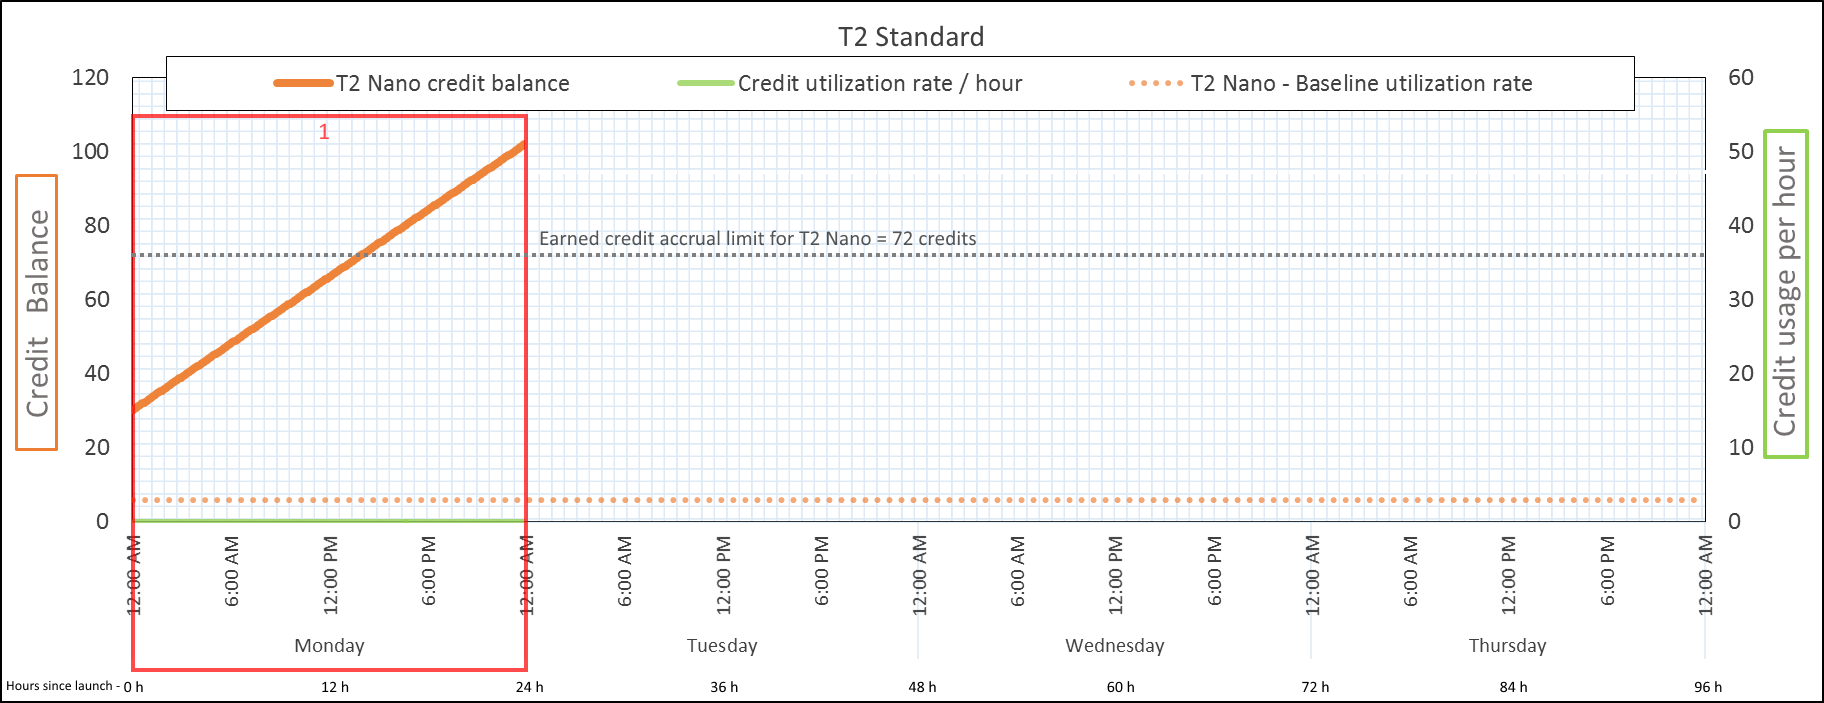 
                     In period 1 for the T2 standard, the credit balance is 102
                        credits.
                  